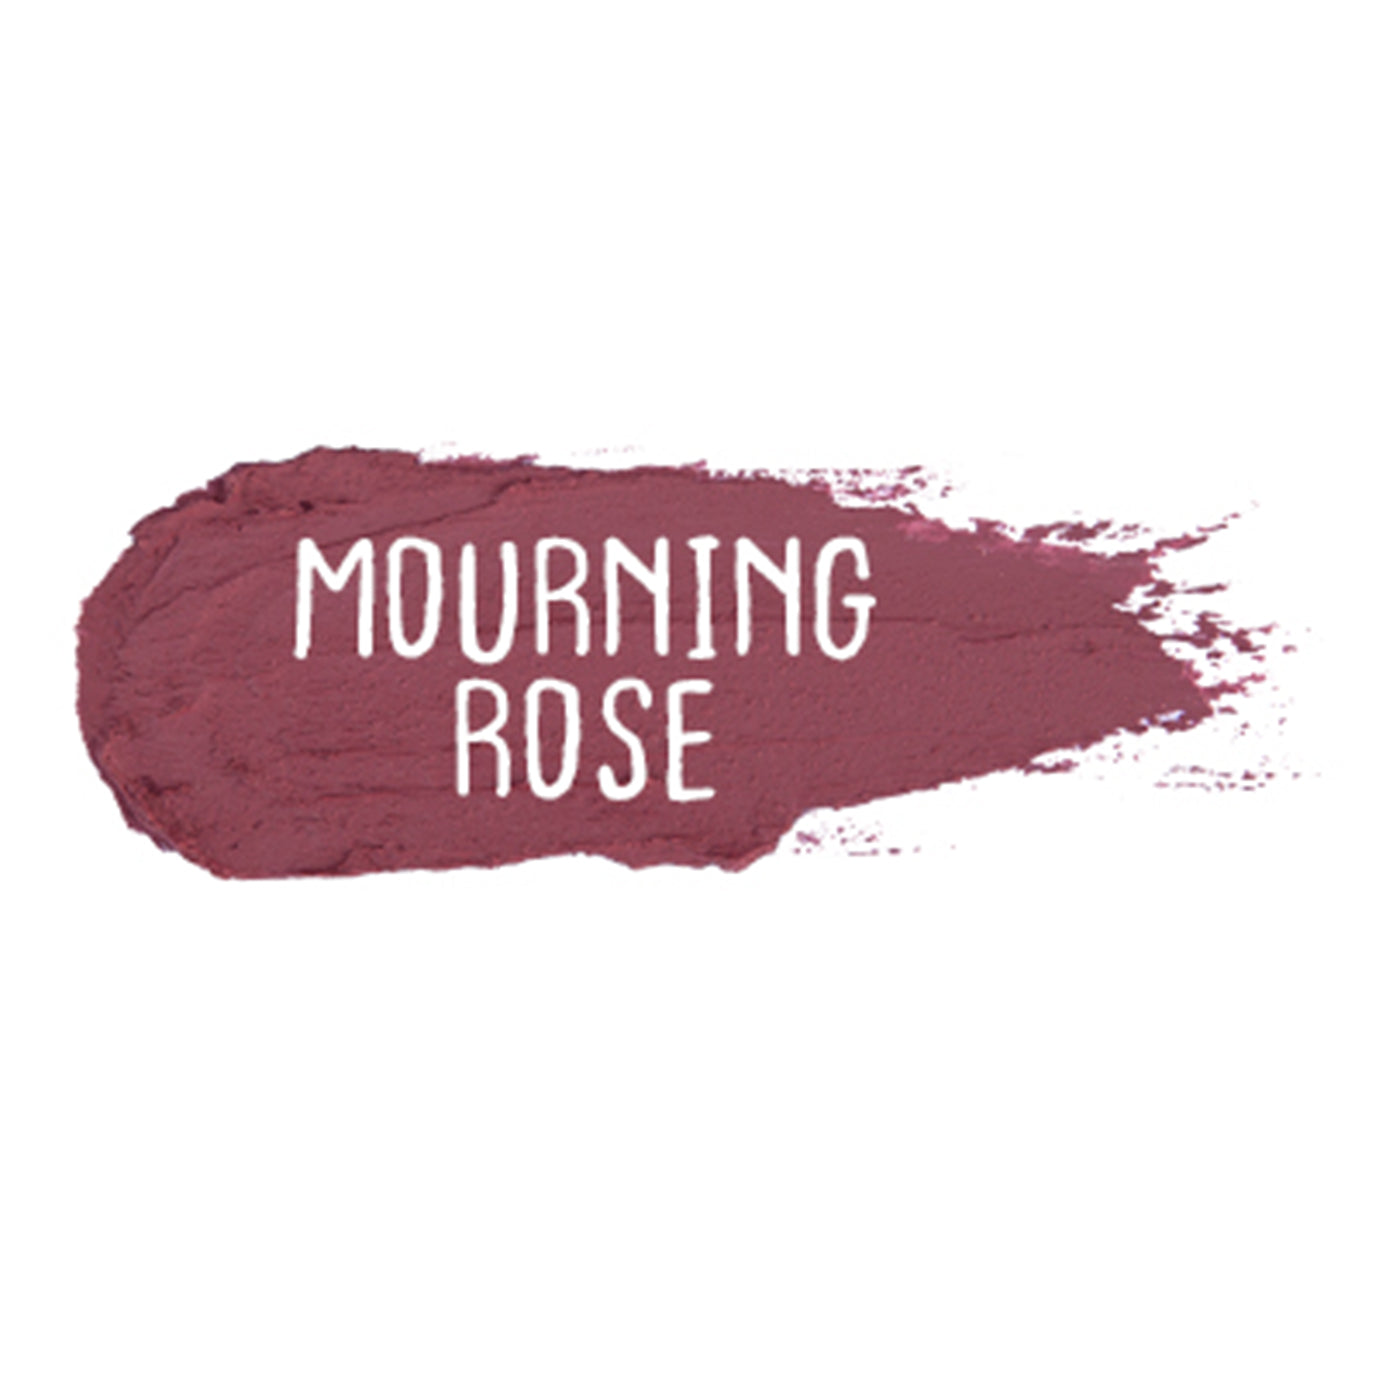 Mourning Rose Refill